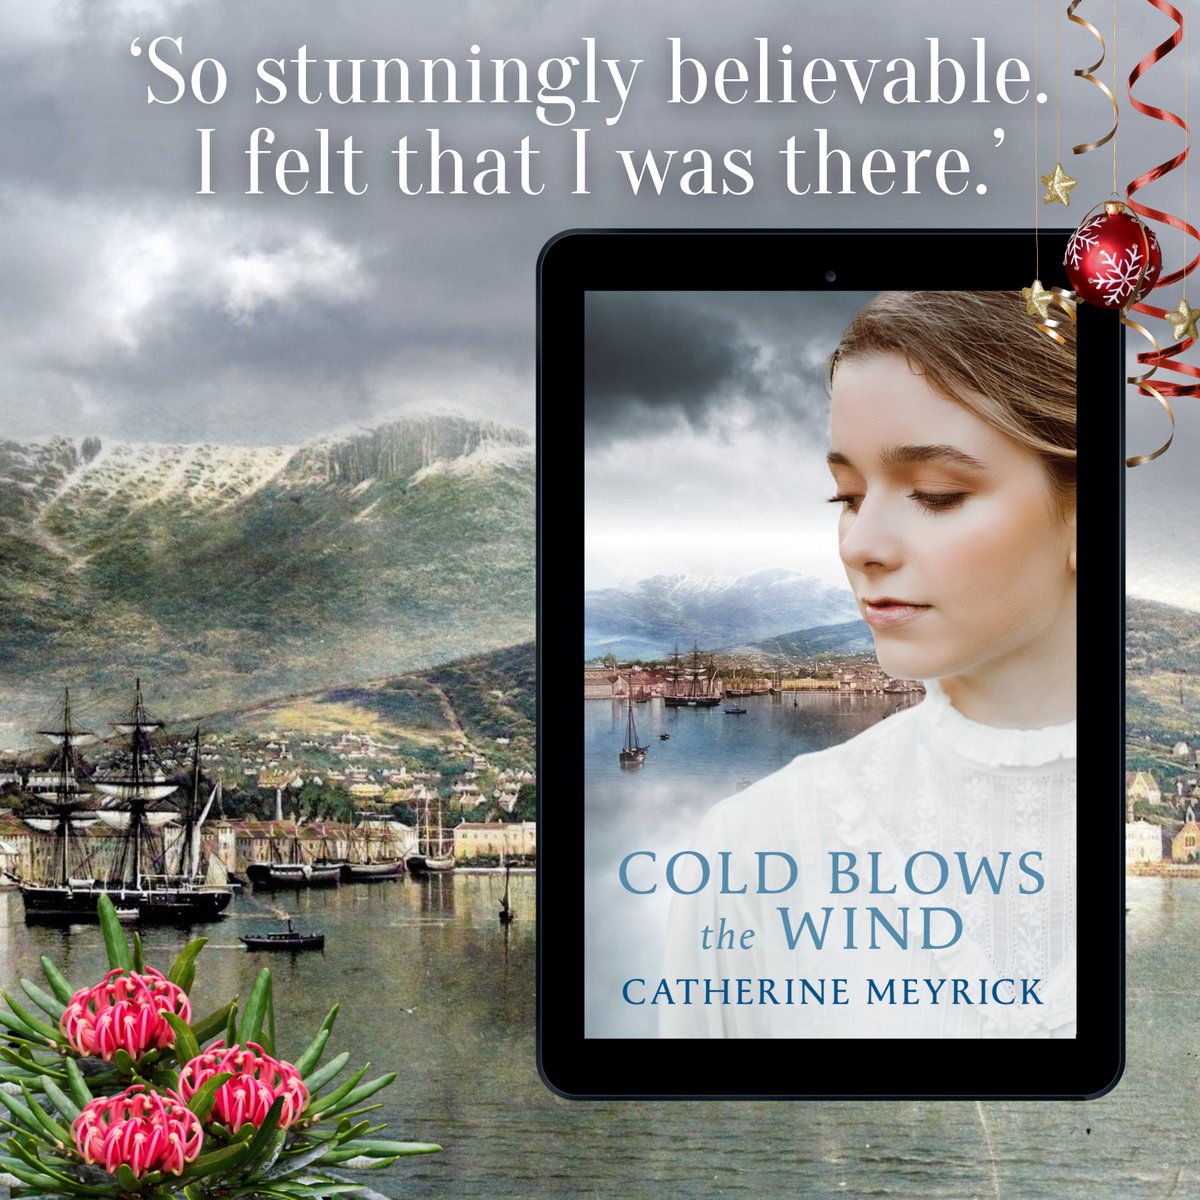 Spend #Christmas in Hobart Town 1878. ‘Poignant, gritty and intensely moving.’ ‘A vivid picture of life in Hobart in the late 1800s immersing the reader in the struggles of those at the bottom.’ books2read.com/ColdBlowstheWi… #HistoricalFiction #Australia